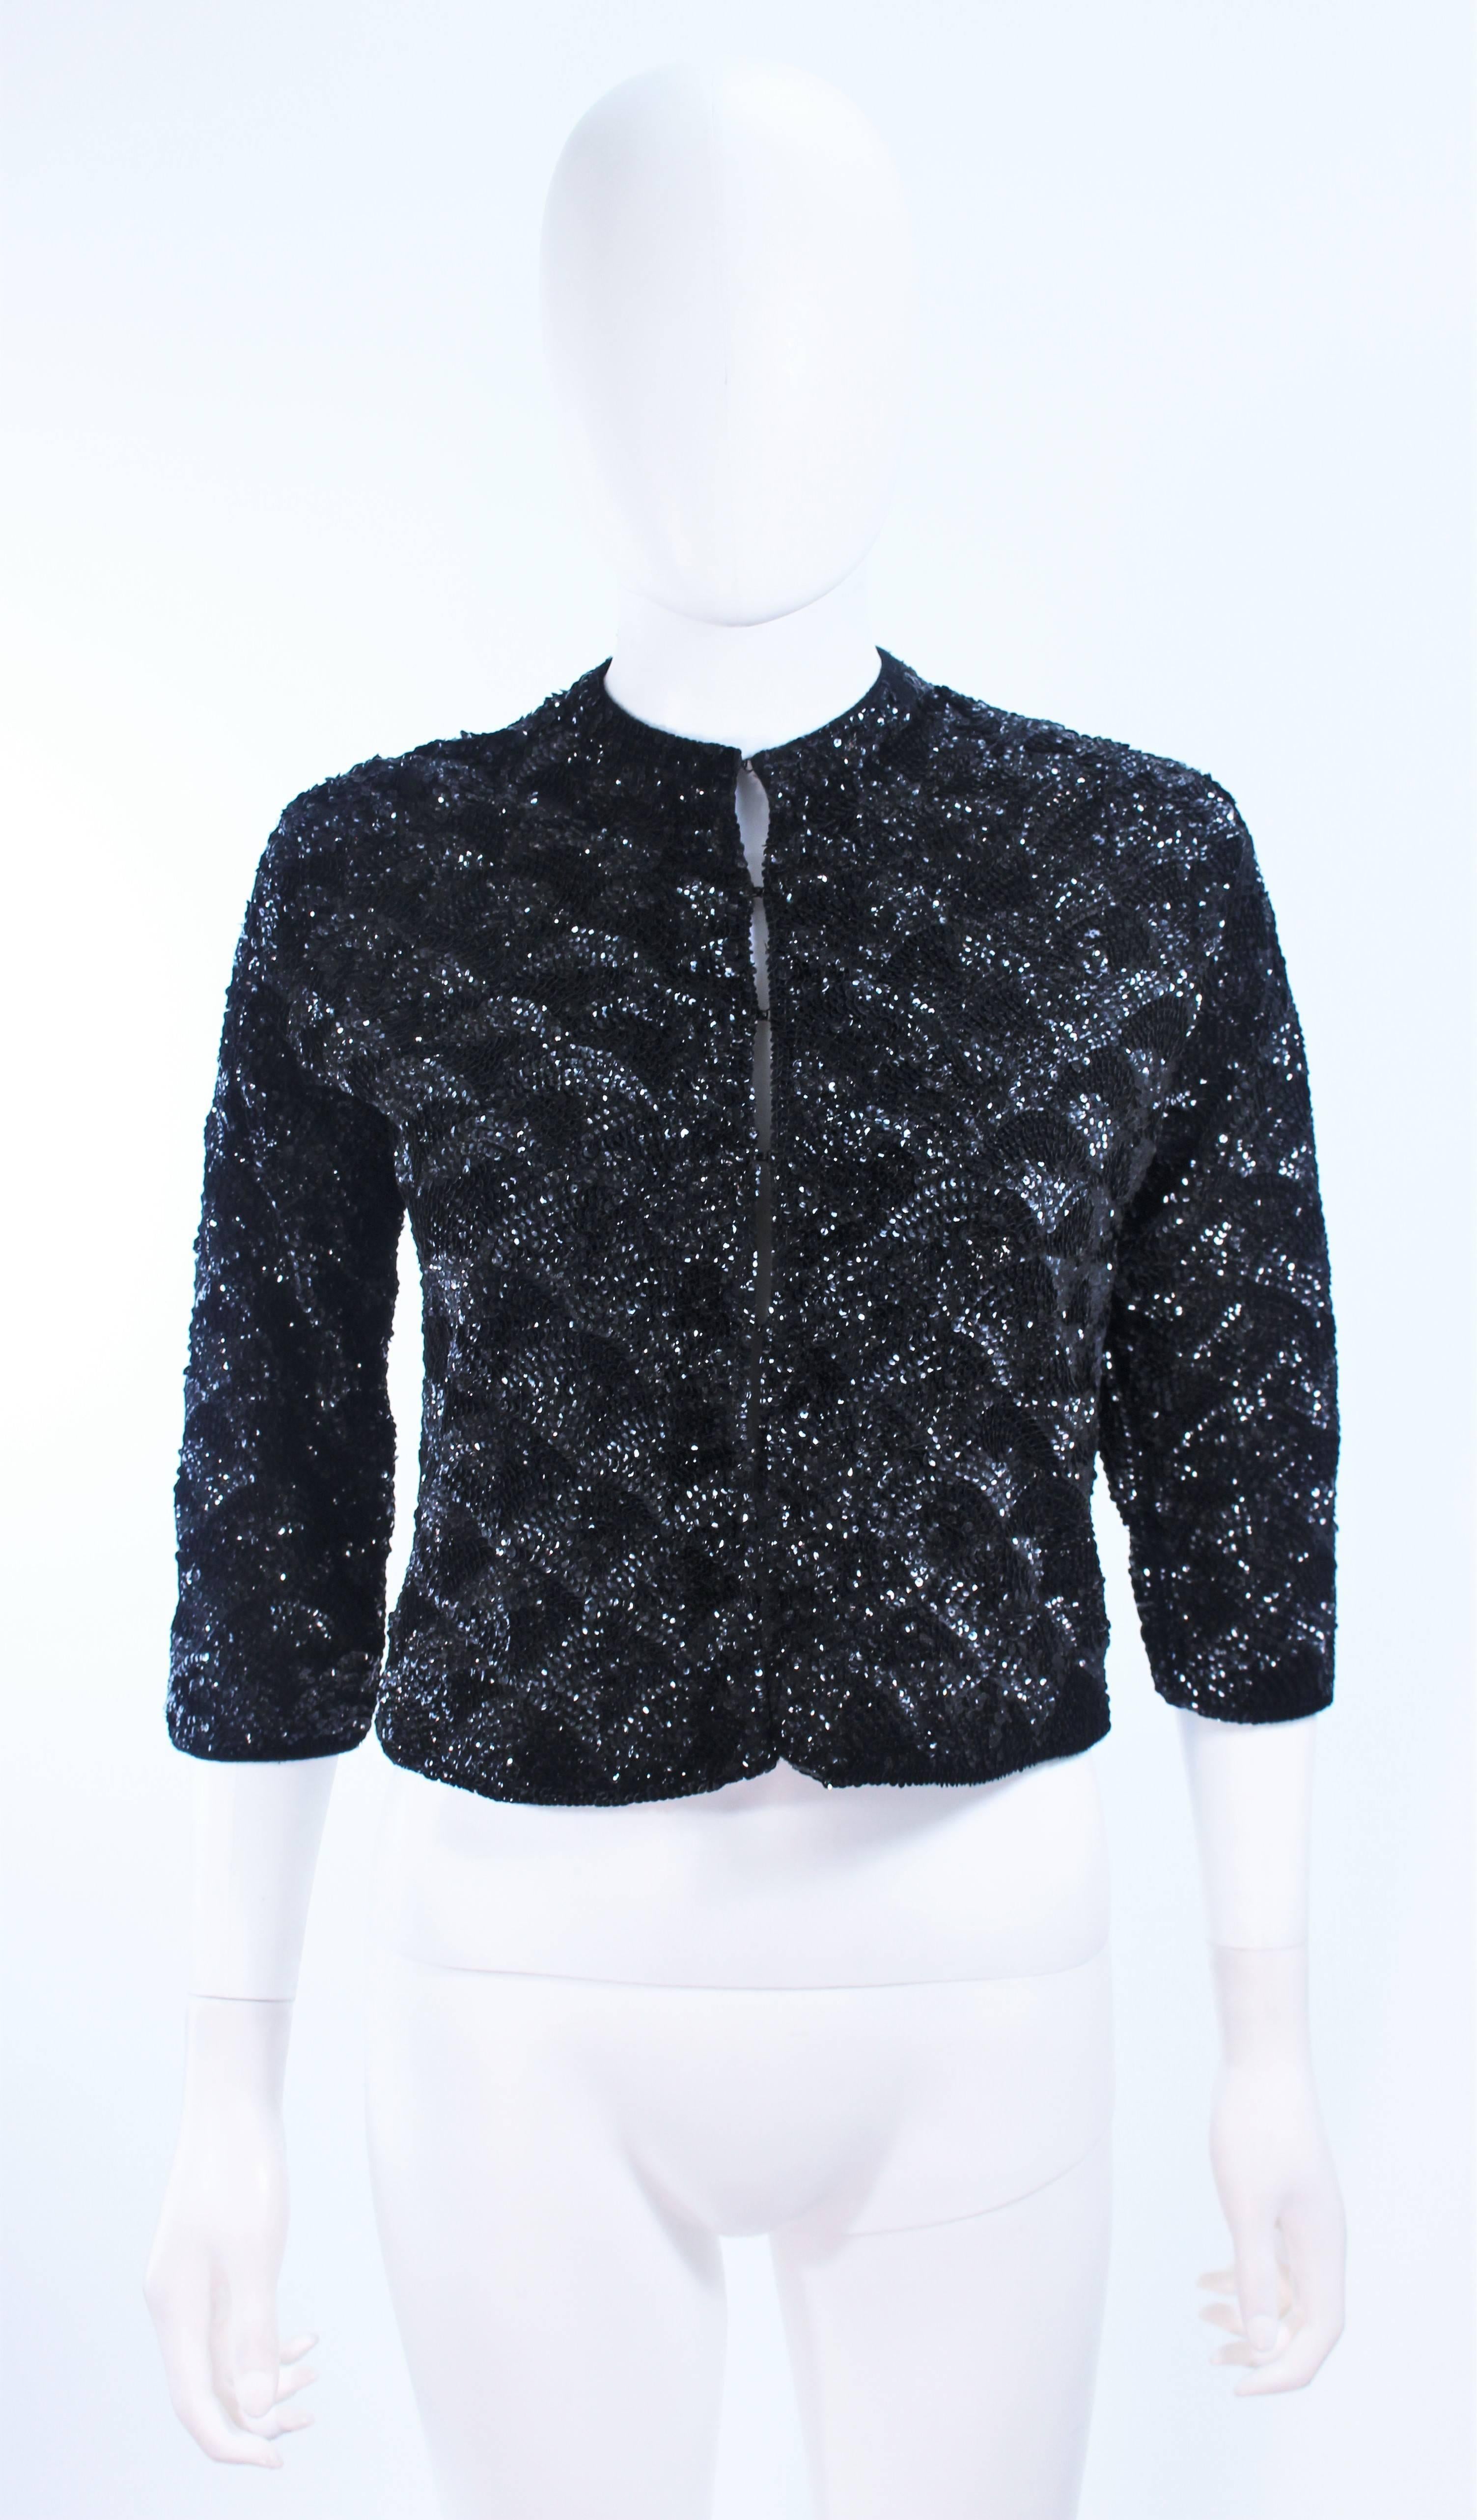 This cardigan is composed of a knit wool with black sequin embellishment in  a fan pattern. There are center front faceted black and gold buttons. In excellent vintage condition.

**Please cross-reference measurements for personal accuracy. Size